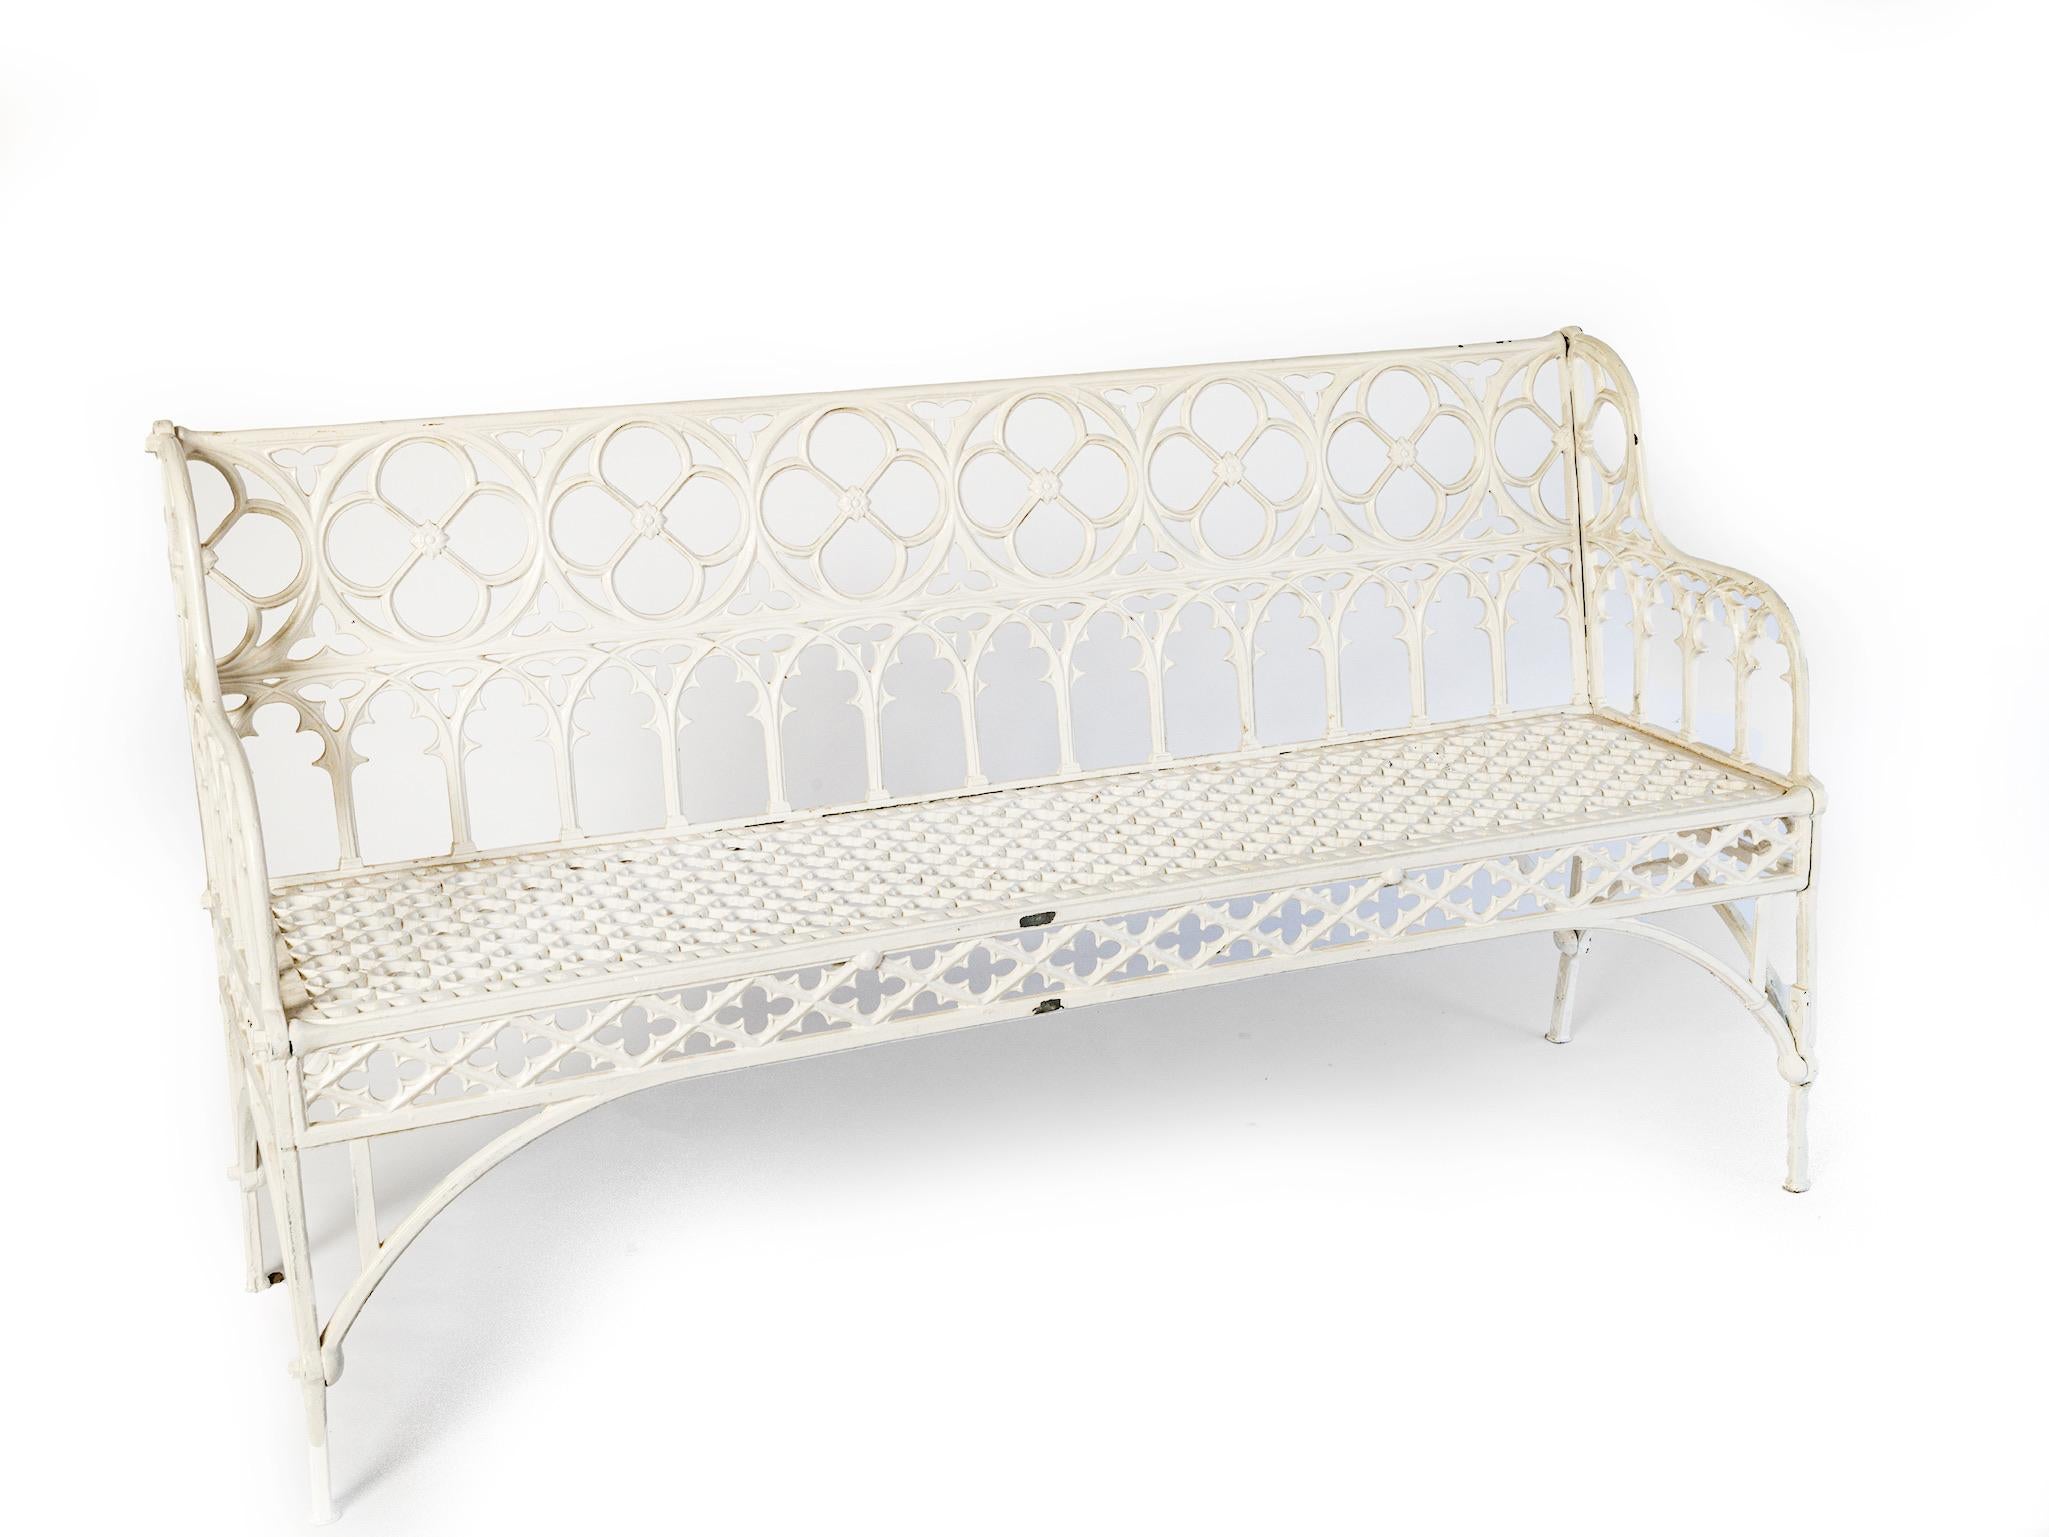 A Napoleon III gothic cast iron garden bench by Foundry Val D’Osne. The model of this bench was created and manufactured by Jean Jaques Ducel around 1850 and later on was taken over by Val D’Osne after 1879. This bench has been repainted by the